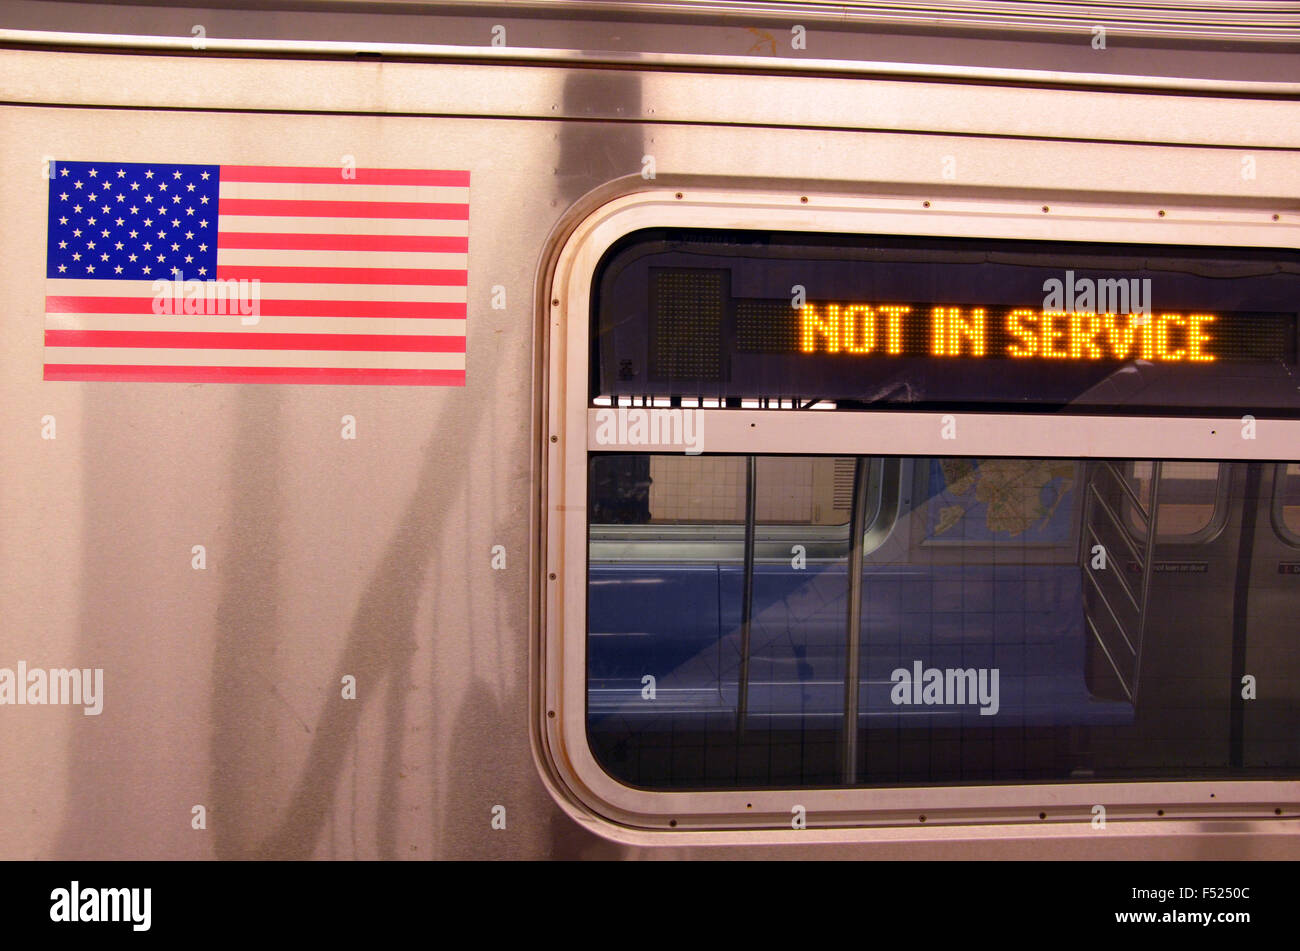 out of service subway train new york Stock Photo